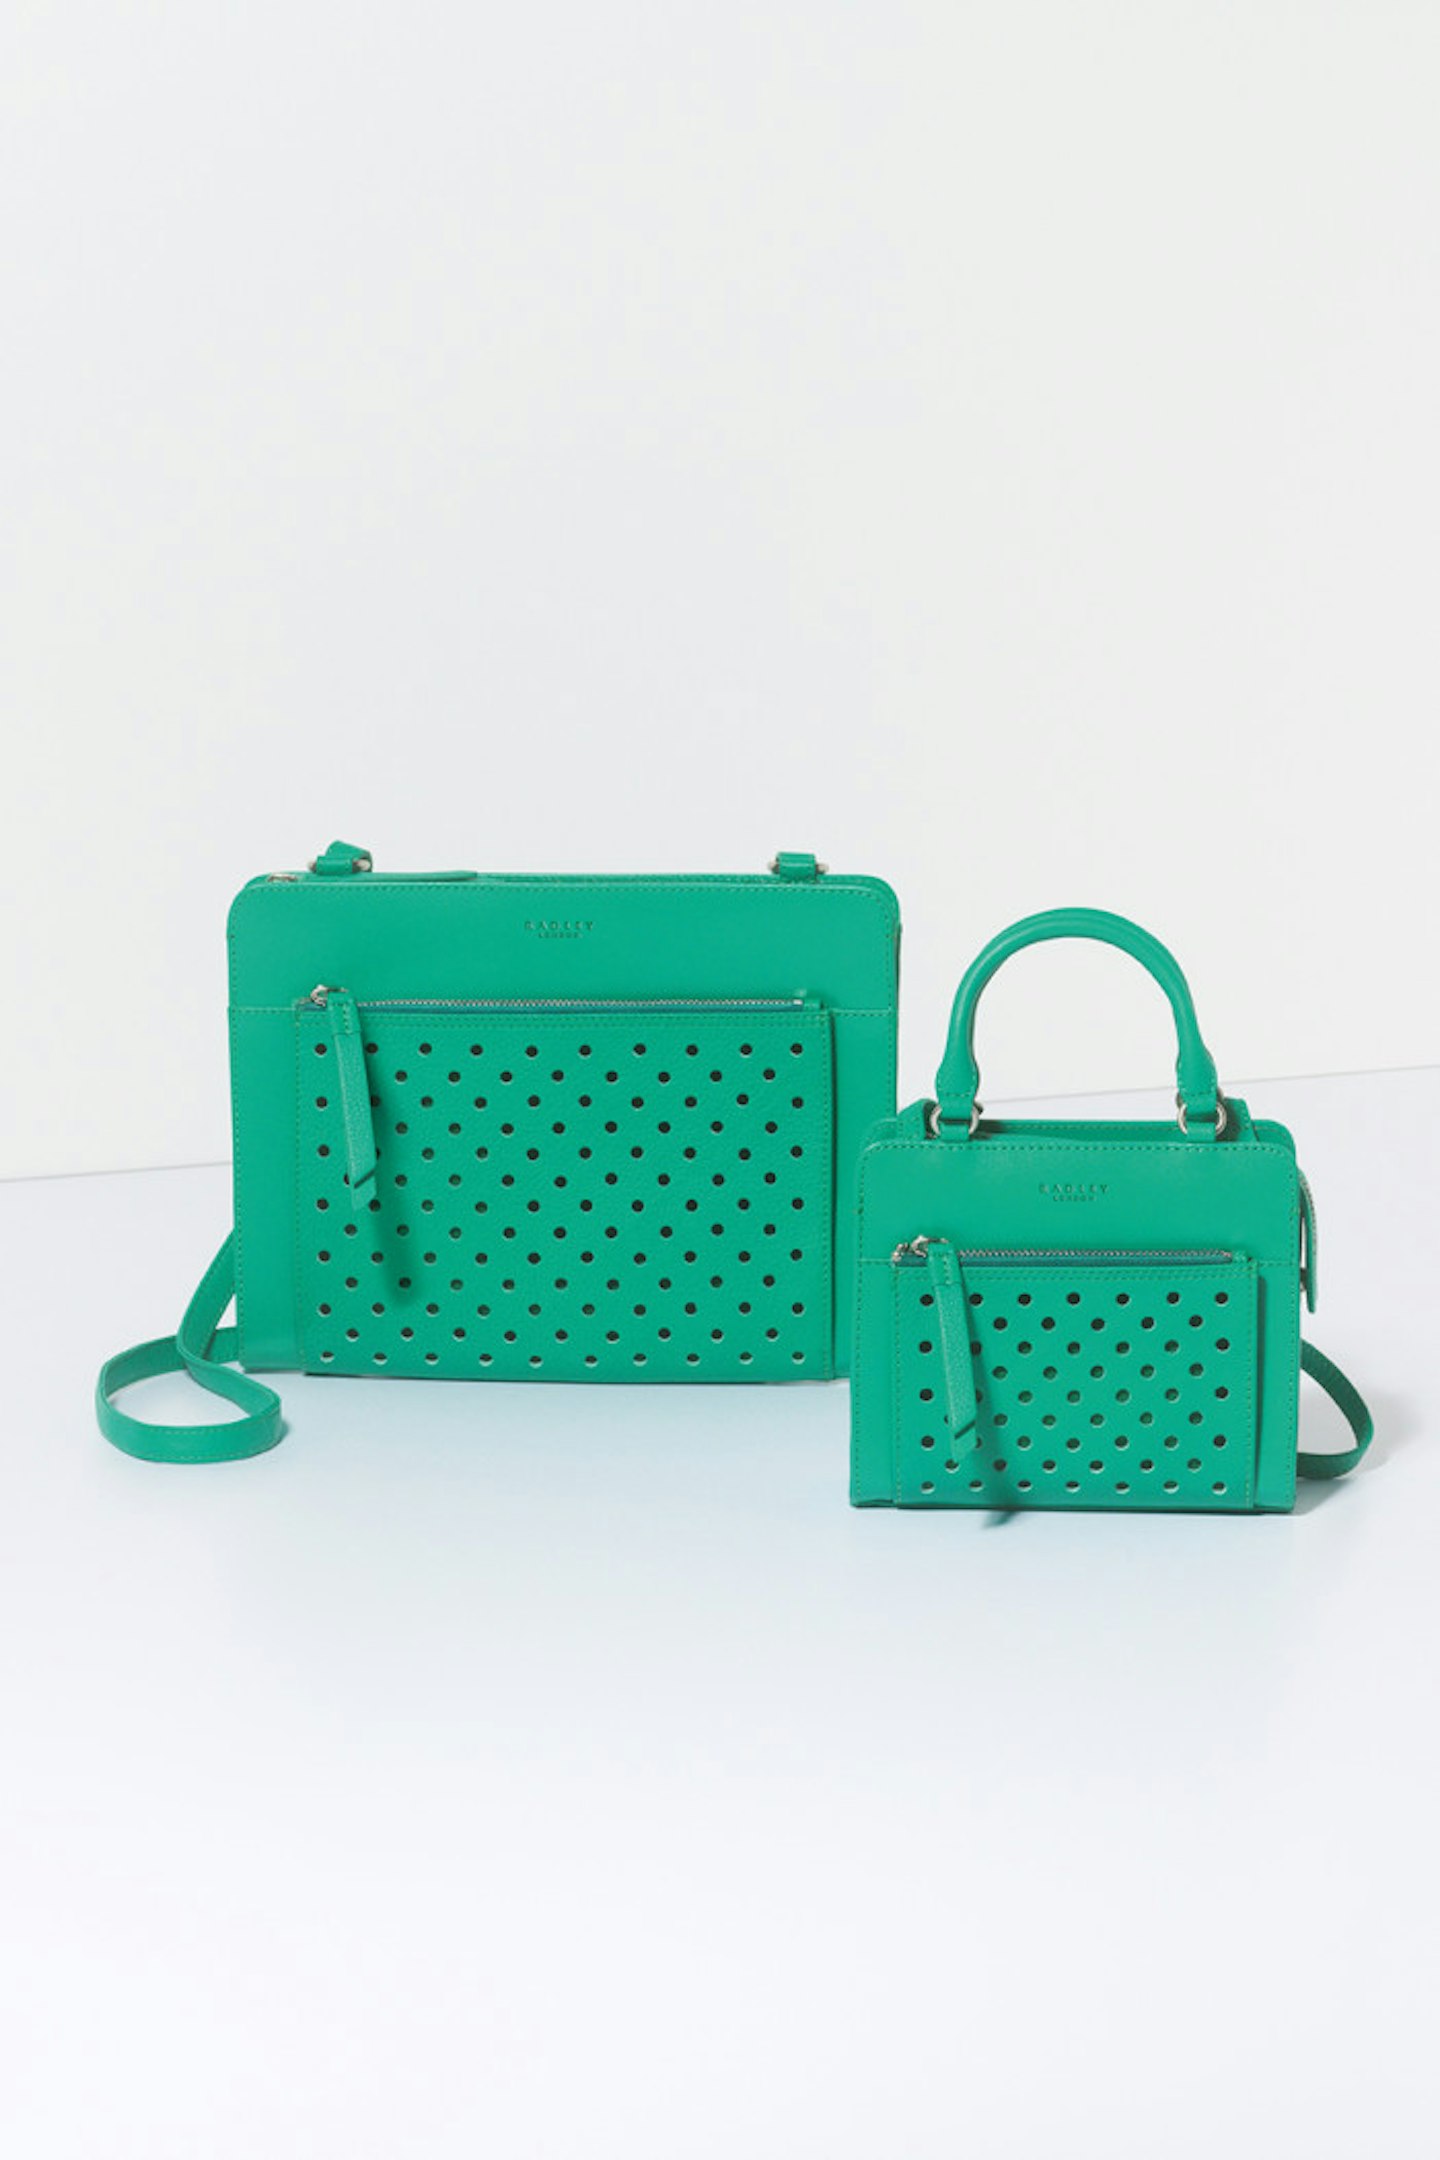 Clerkenwell Jade from the new Radley collection SS15.